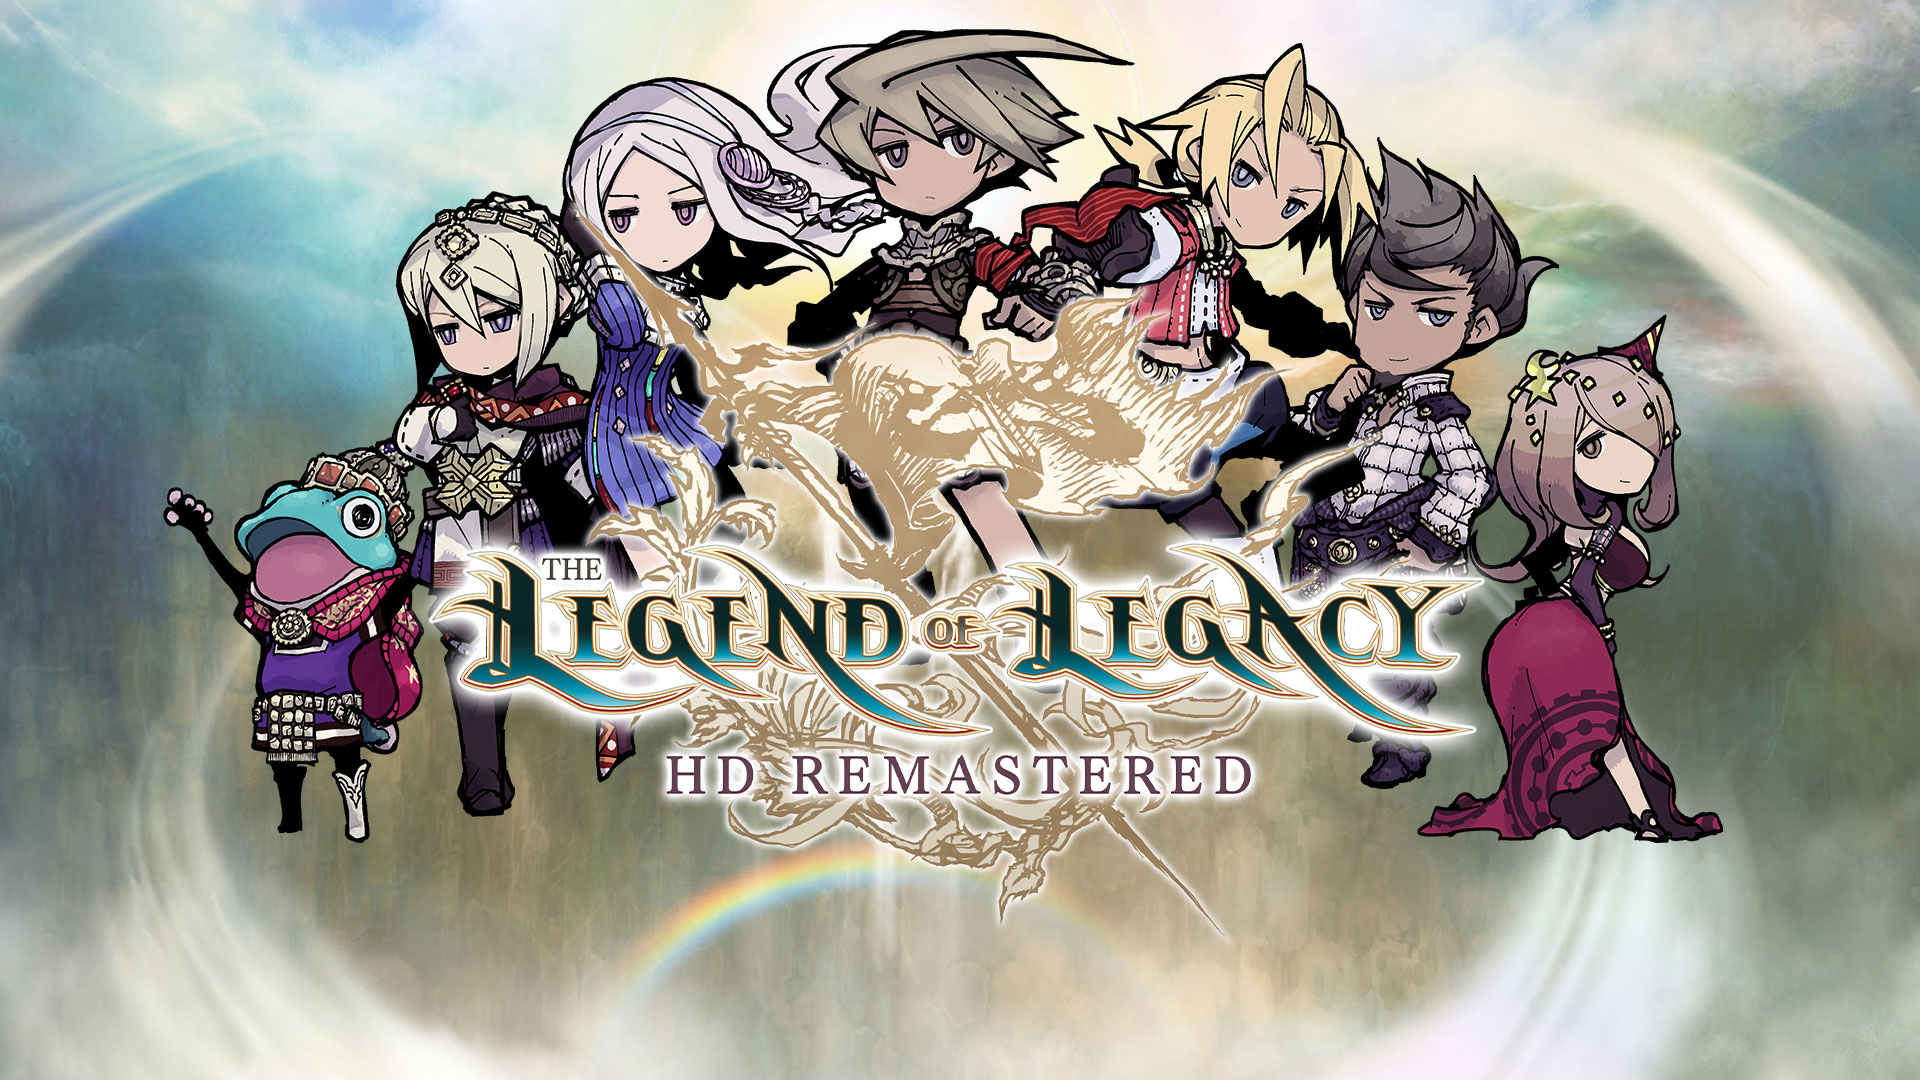 The Legend of Legacy HD Remastered key art featuring all seven playable characters